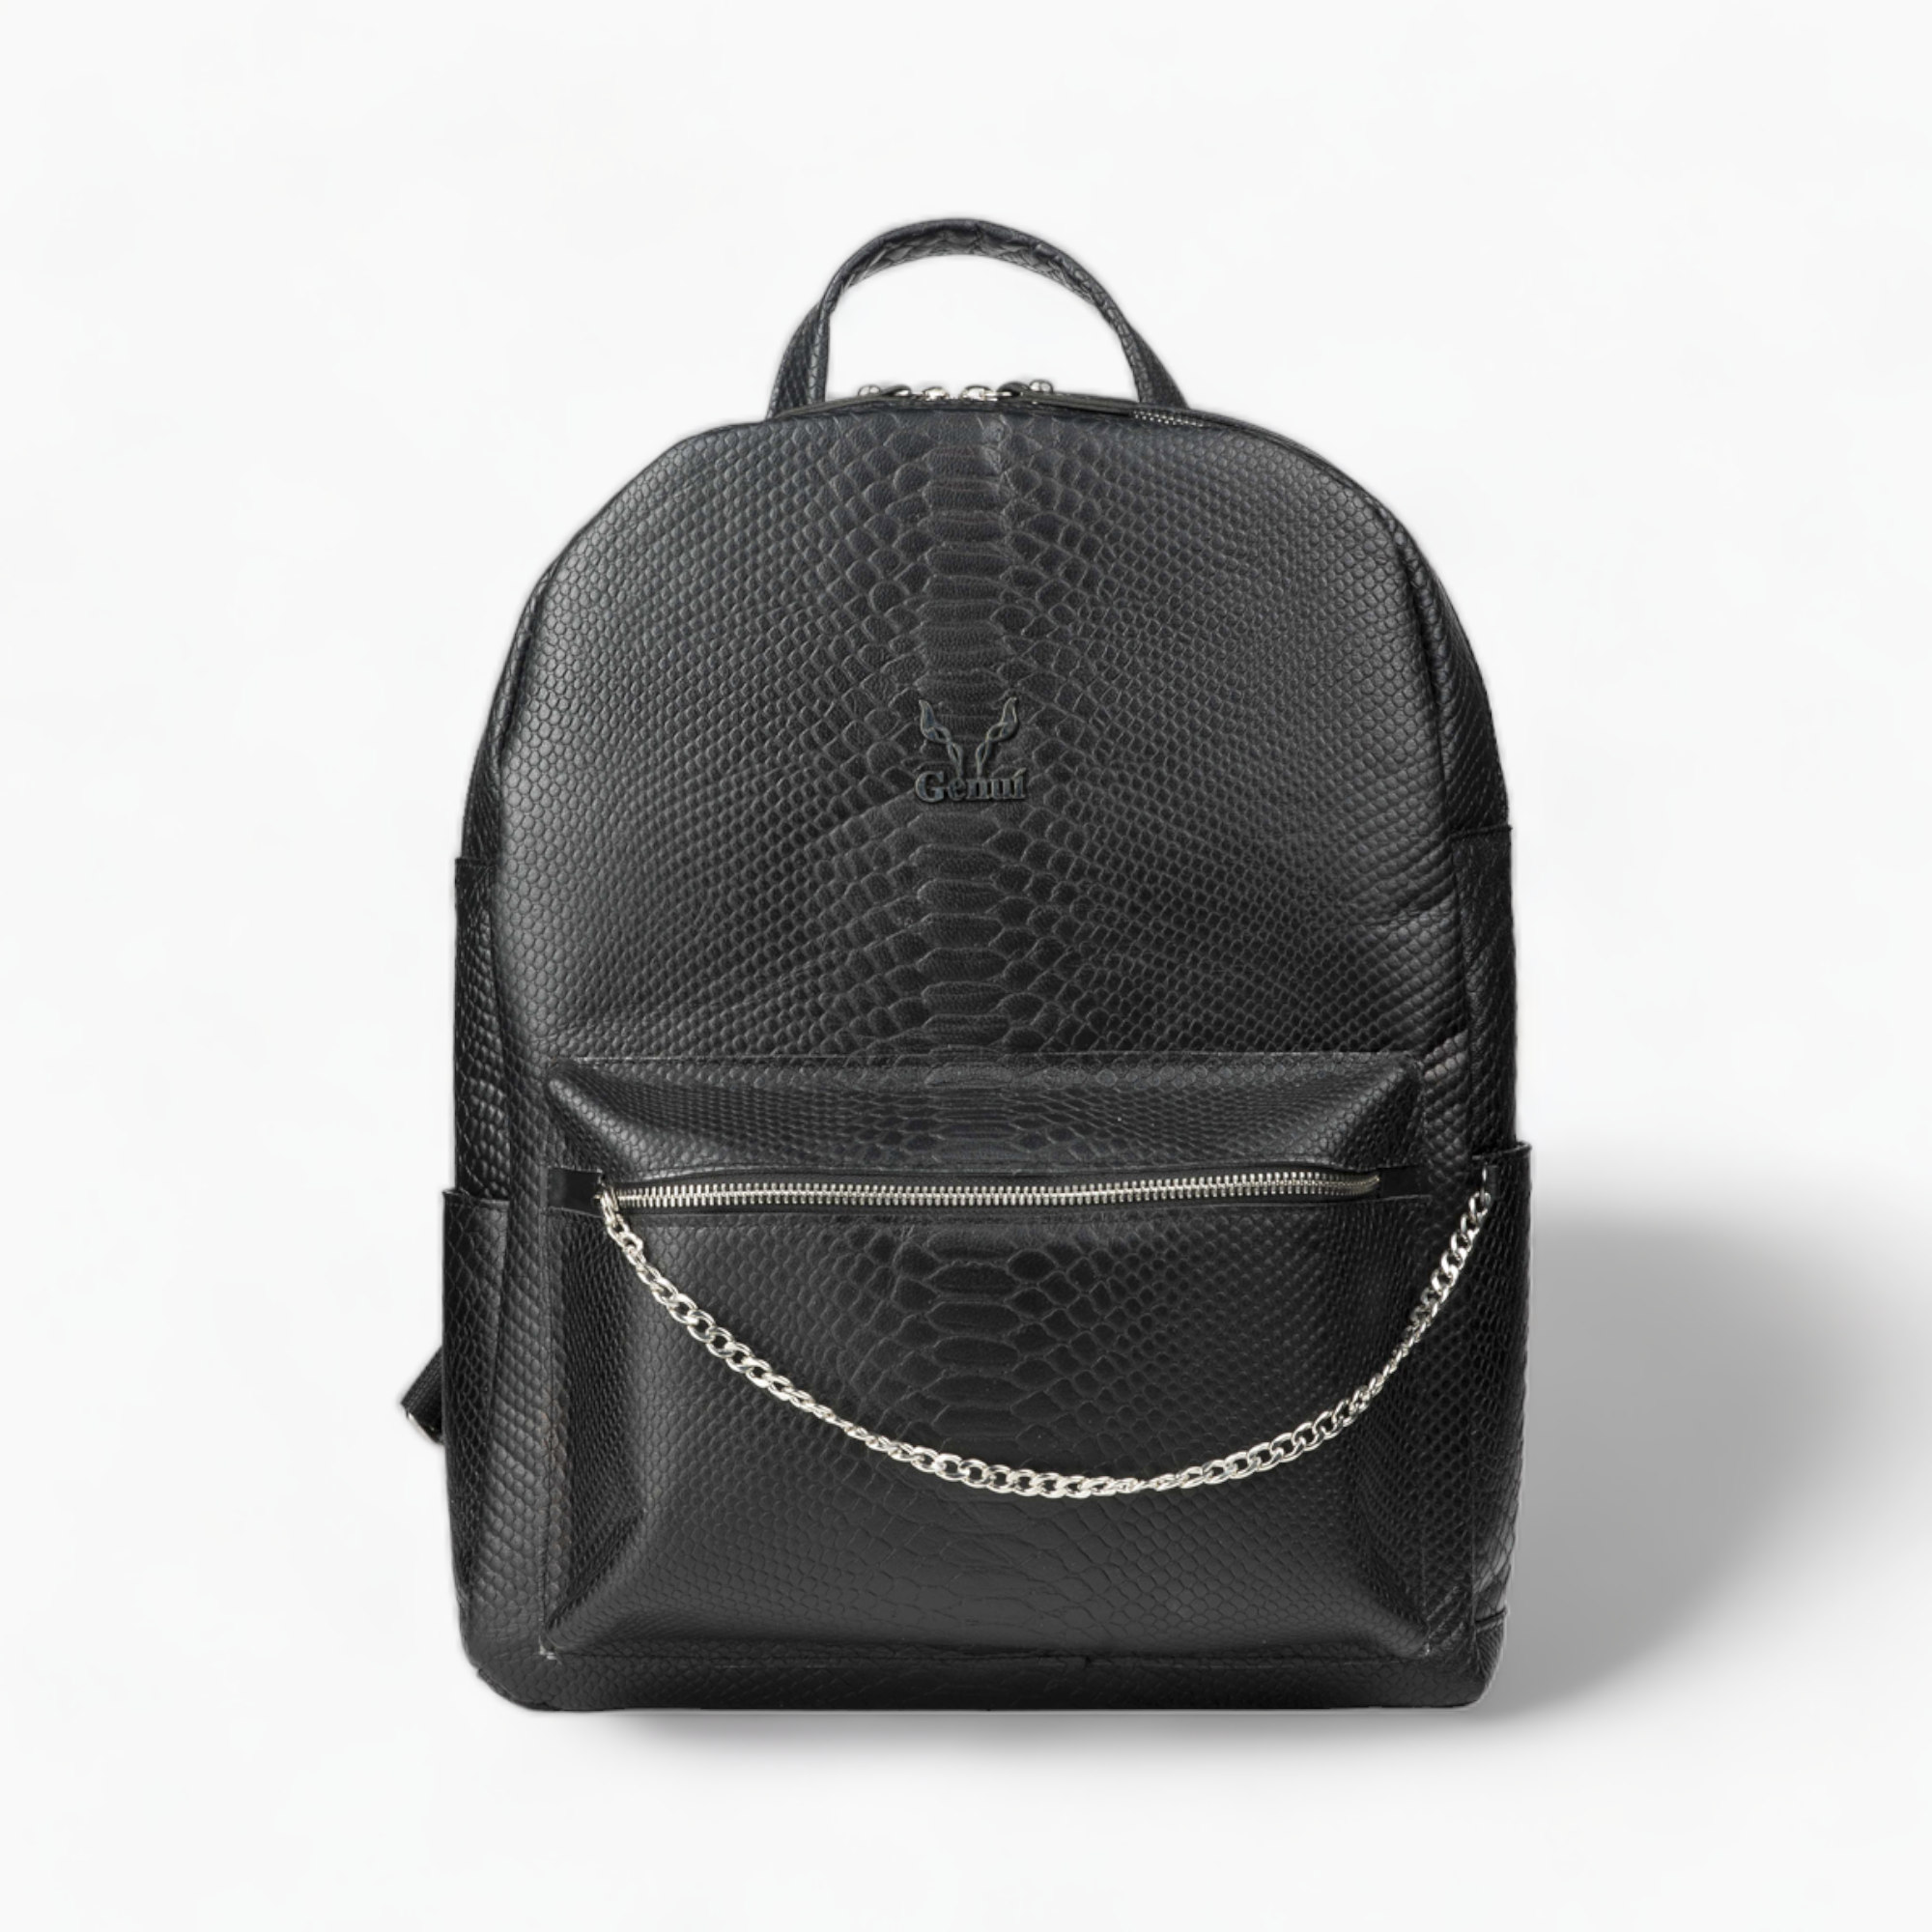 Black leather backpack with a chain